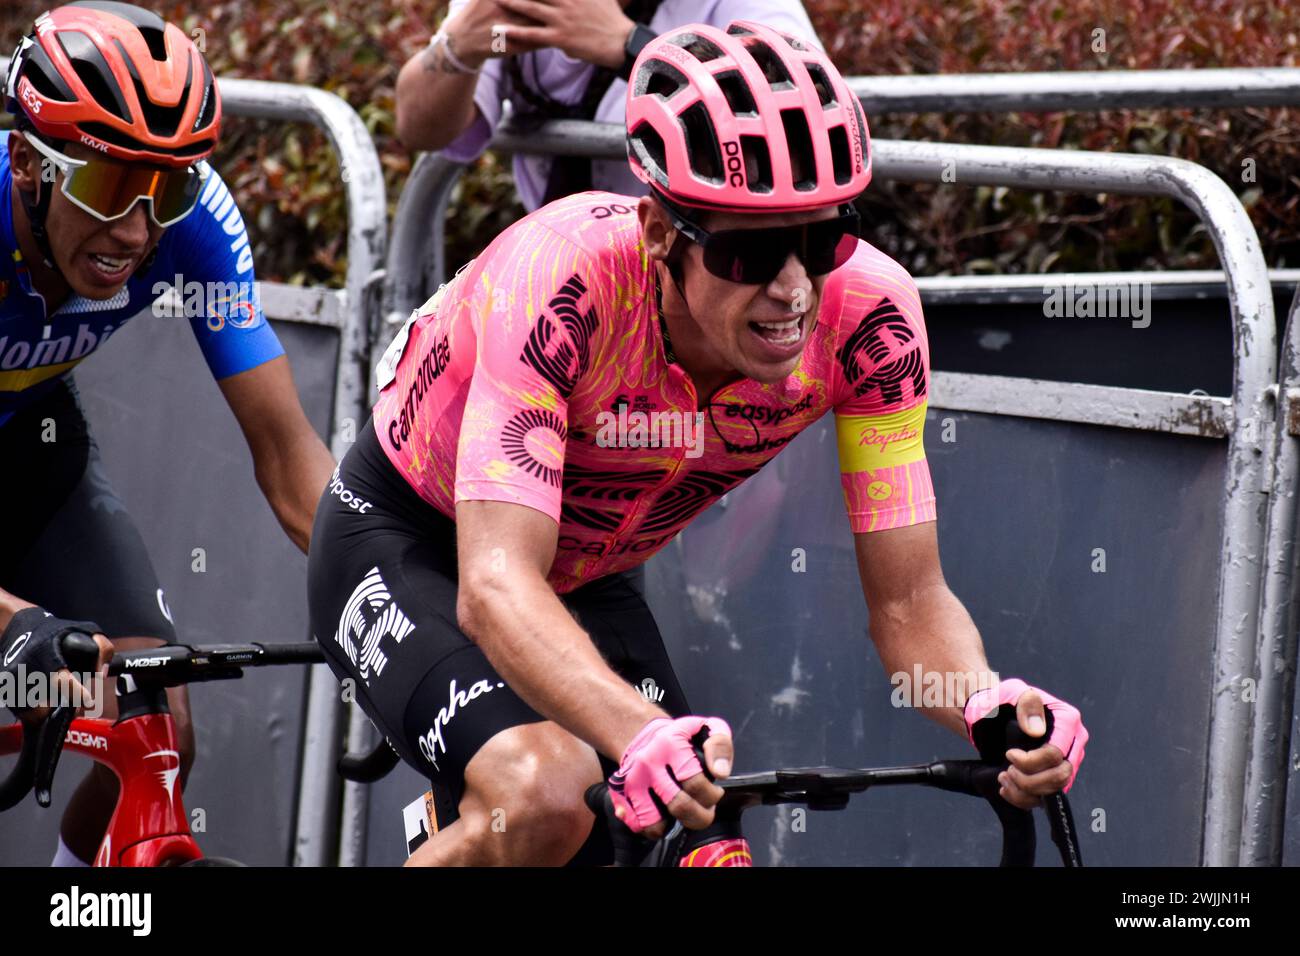 Bogota, Colombia. 10th Feb, 2024. Team Colombia Egan Bernal (Back) and Education First (EF) team Rigoberto Uran (Pink Uniform) during the Tour Colombia 2.1 phase between Villeta and Bogota, Colombia on February 10, 2024. Photo by: Cristian Bayona/Long Visual Press Credit: Long Visual Press/Alamy Live News Stock Photo